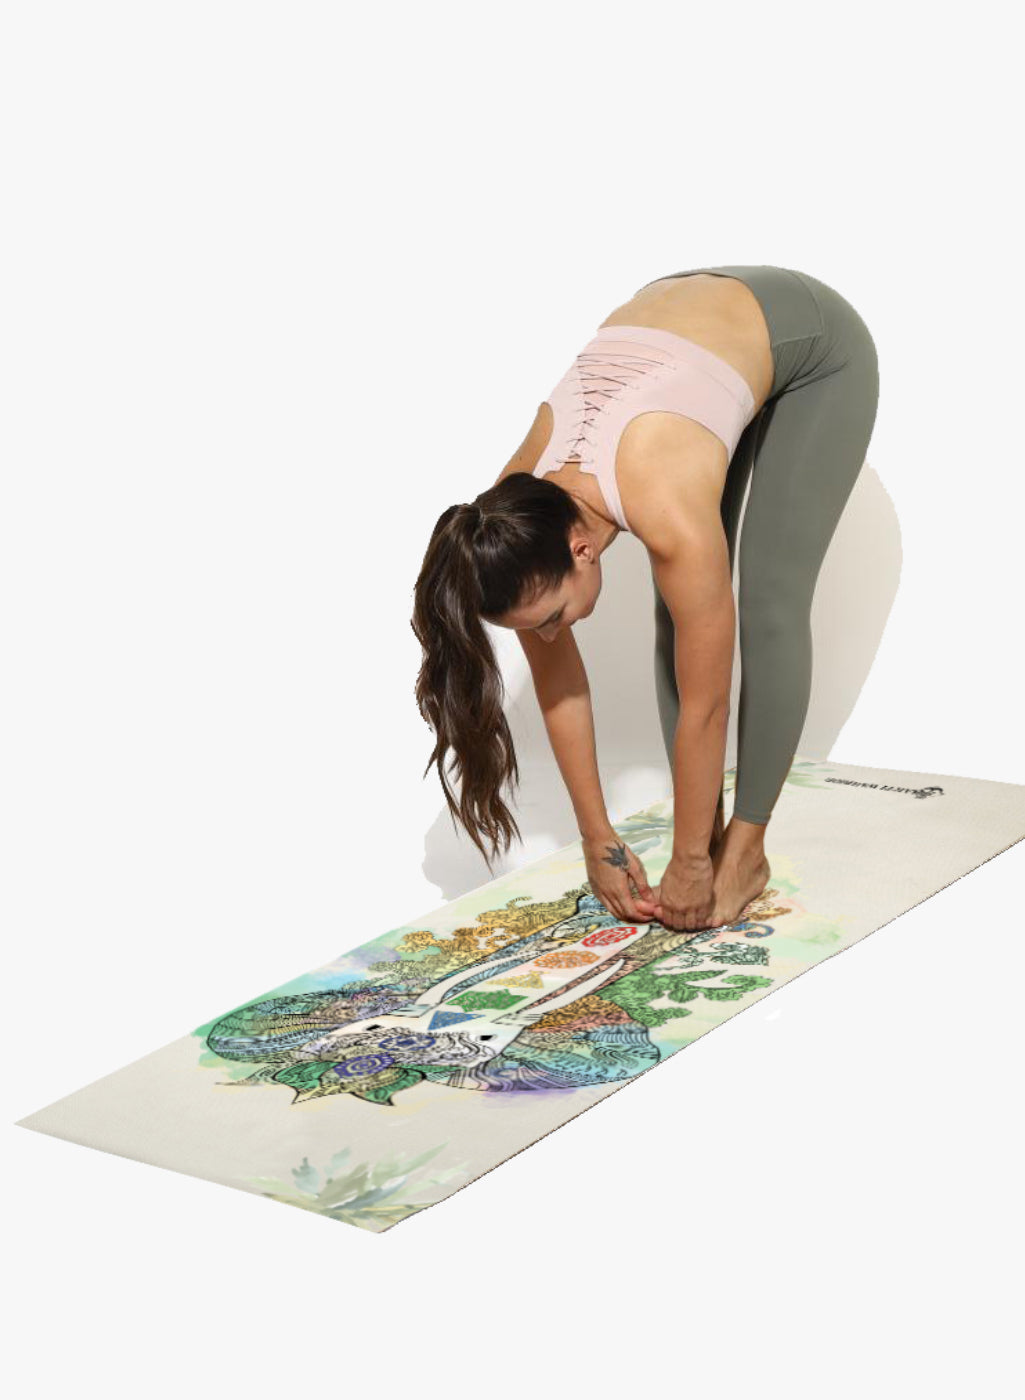 Shakti Warrior Elephant-Inspired TPE Yoga Mat - Eco-friendly, 6mm cushioning, and non-slip grip. Connect with strength and grace in your practice